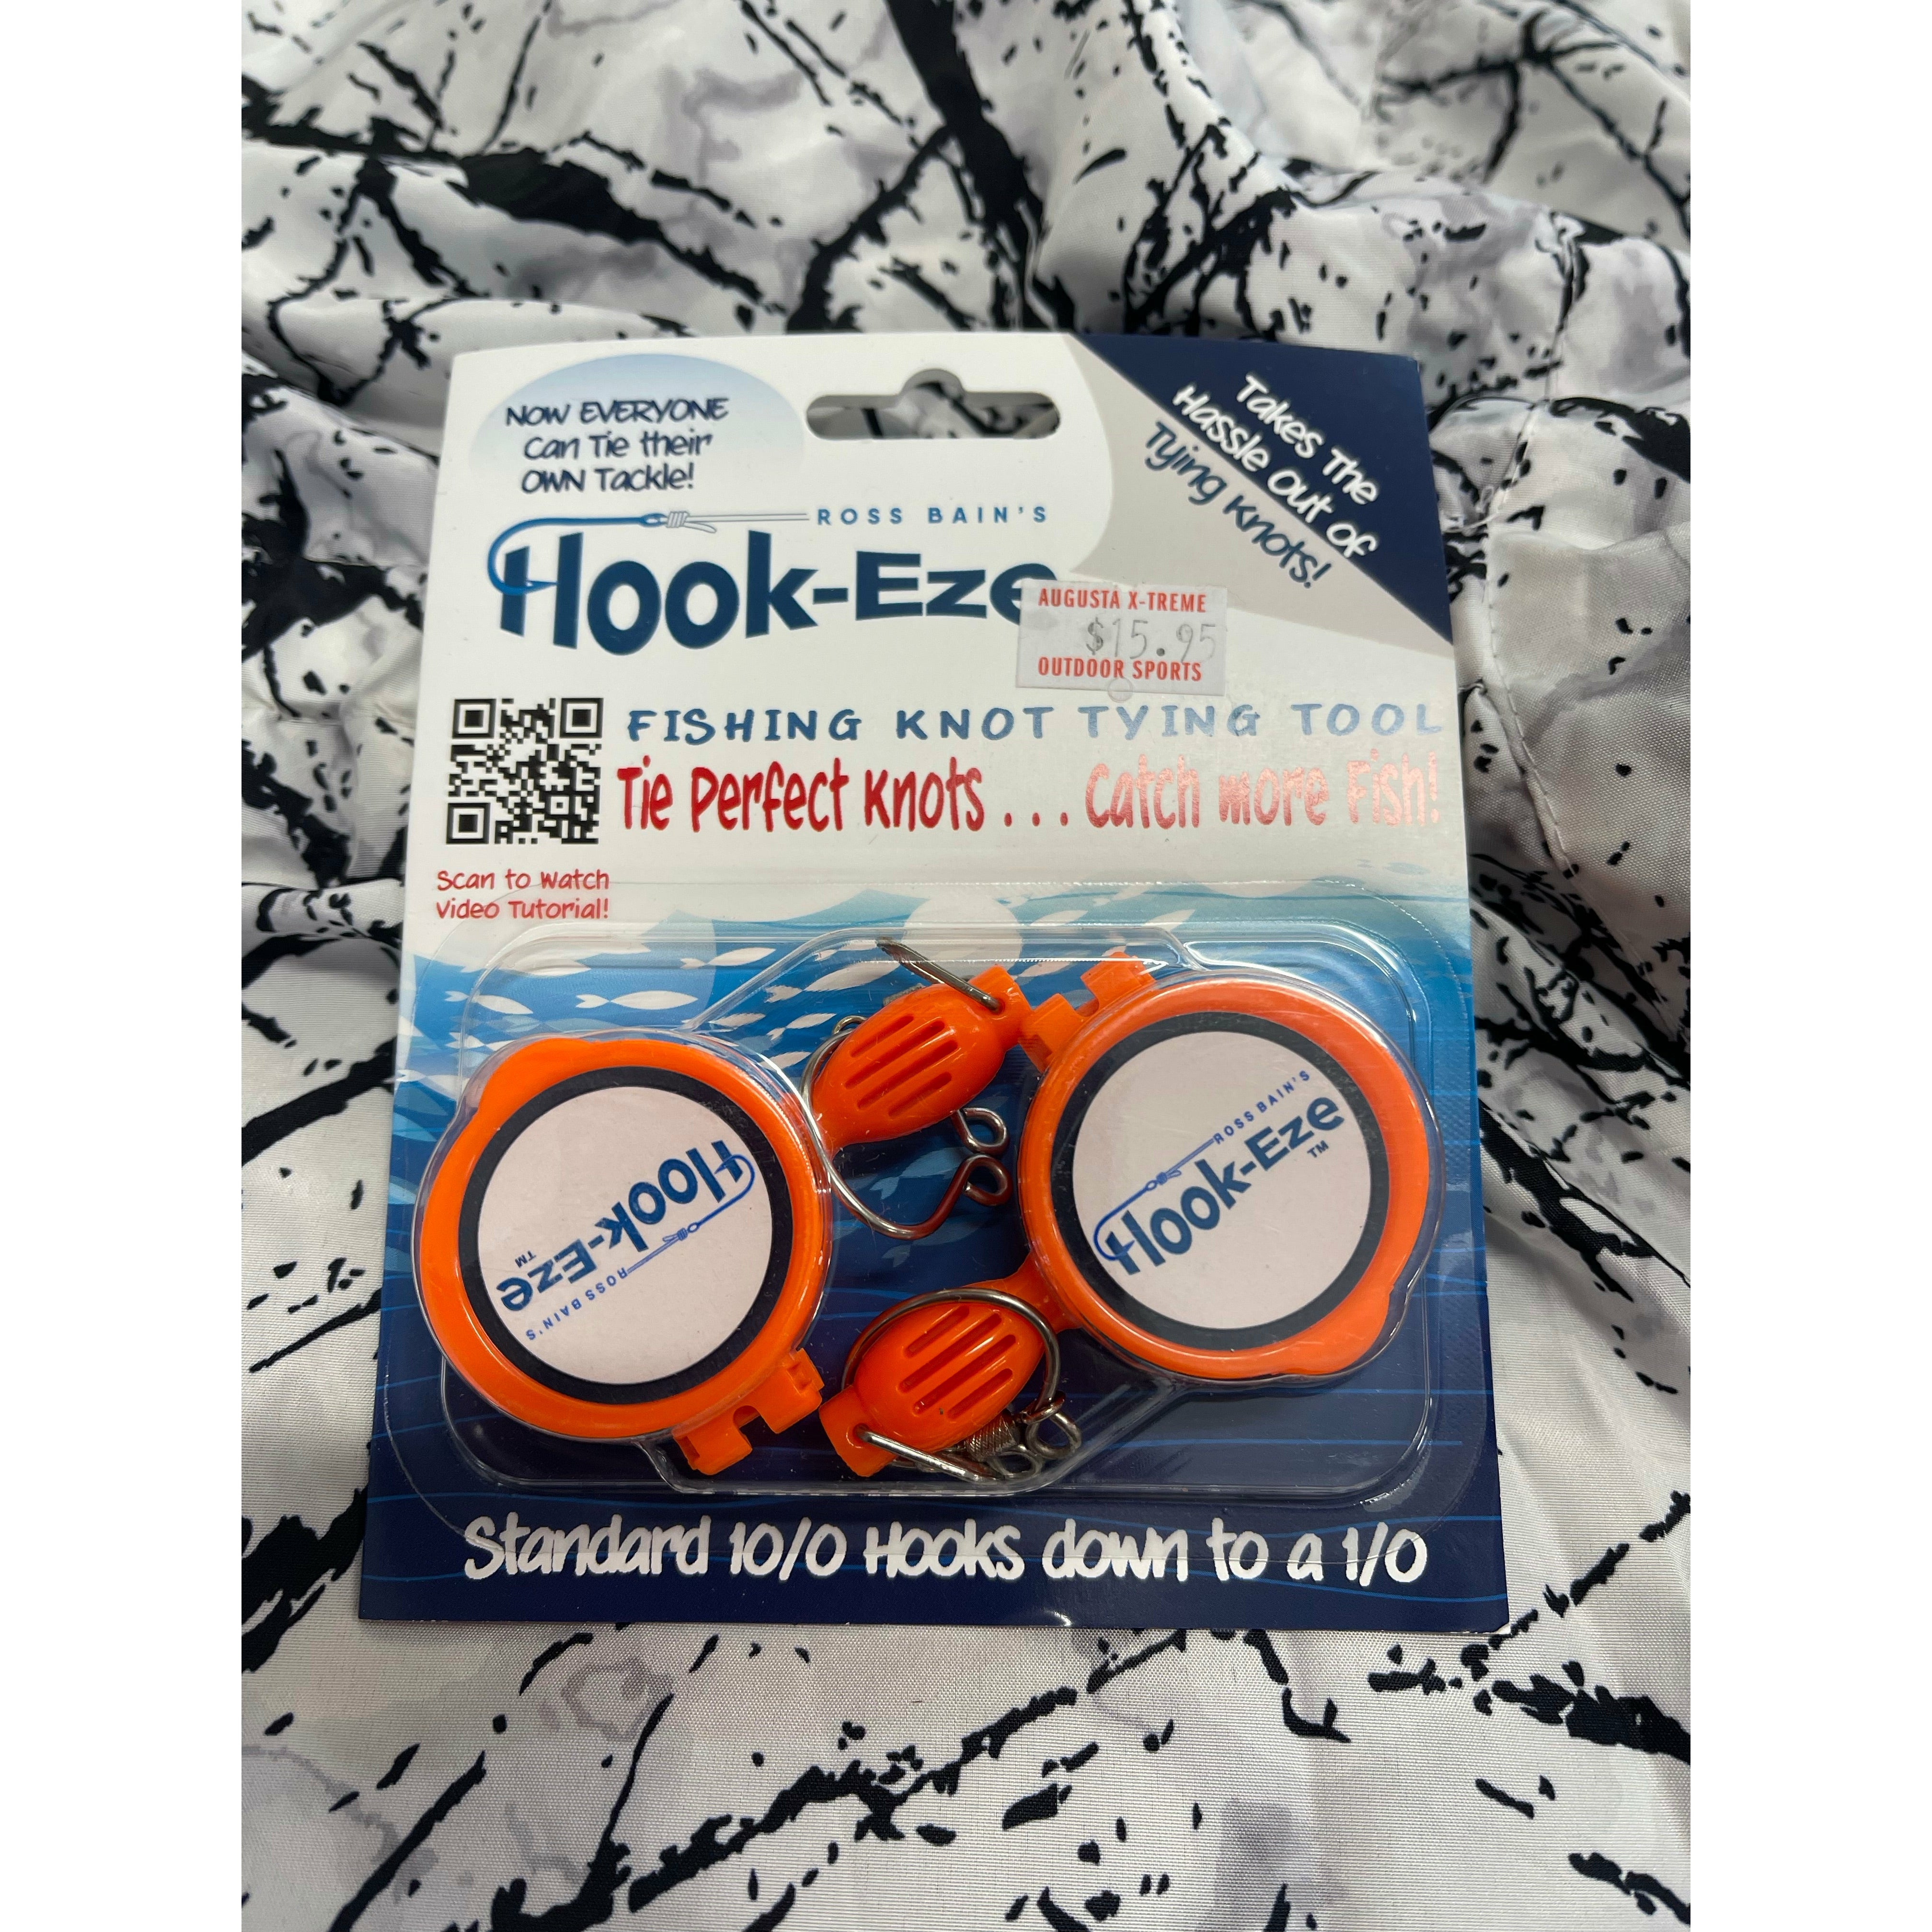 Hook-Eze Large Size 1/0-10/0 – Augusta Xtreme Outdoor Sports